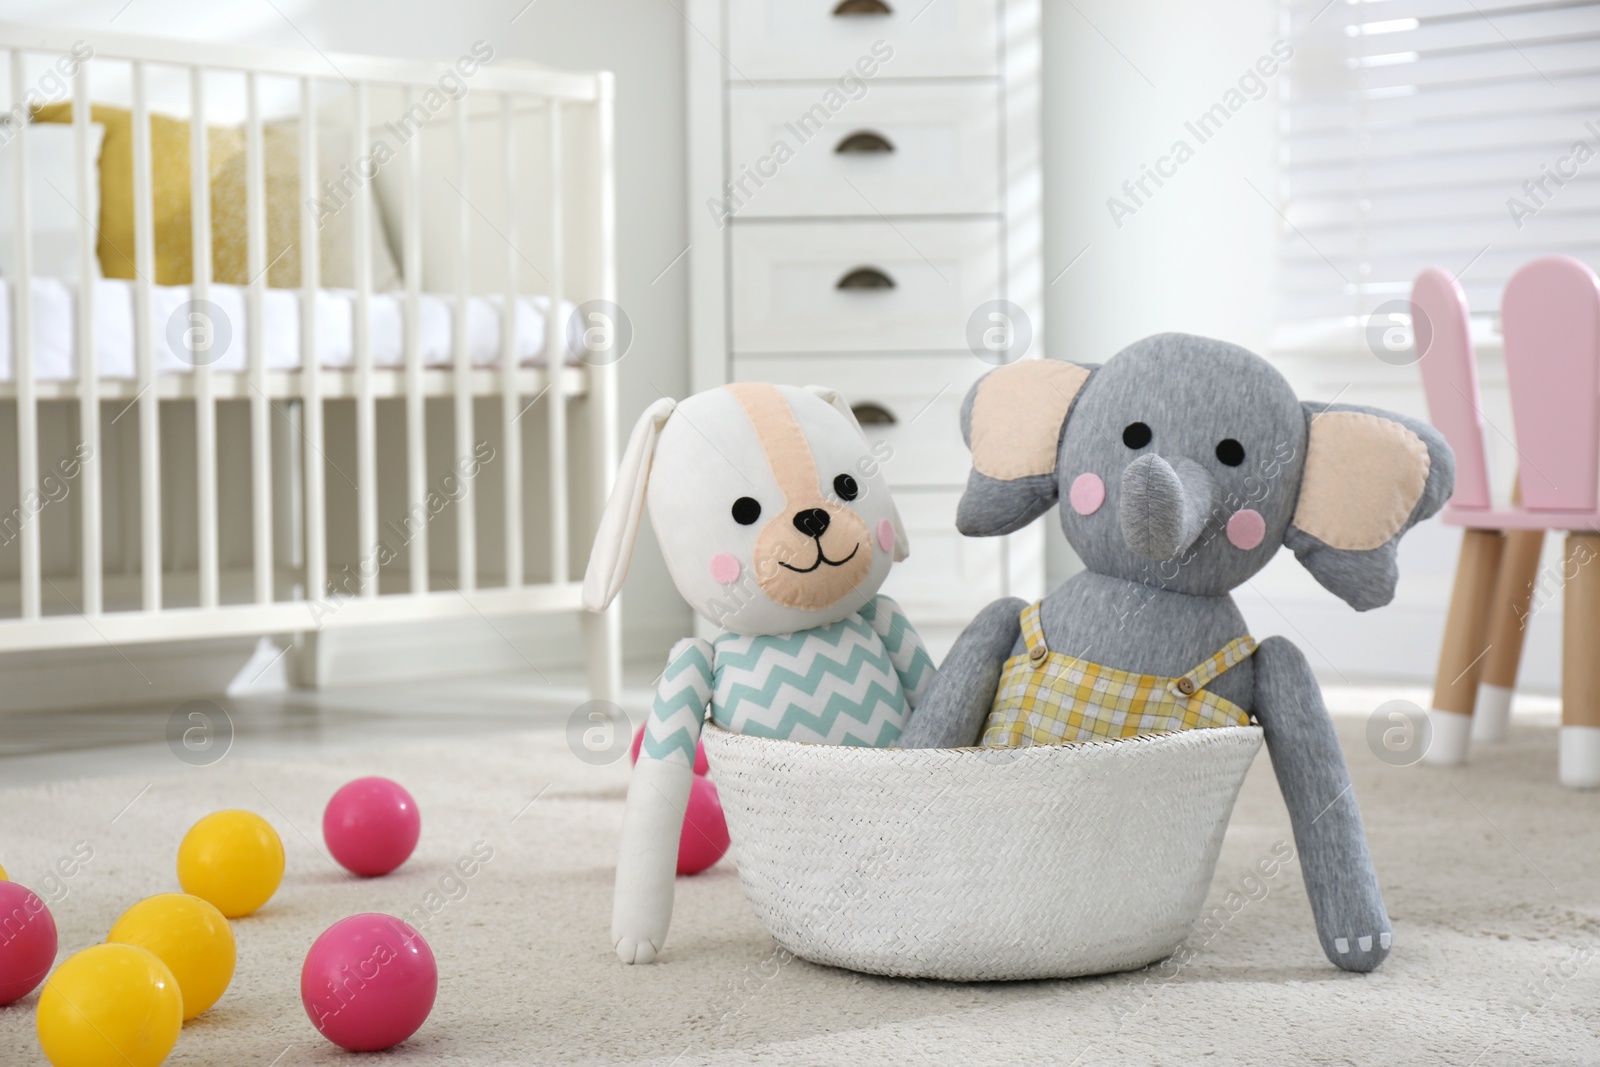 Photo of Cute toys on floor in baby room. Interior elements